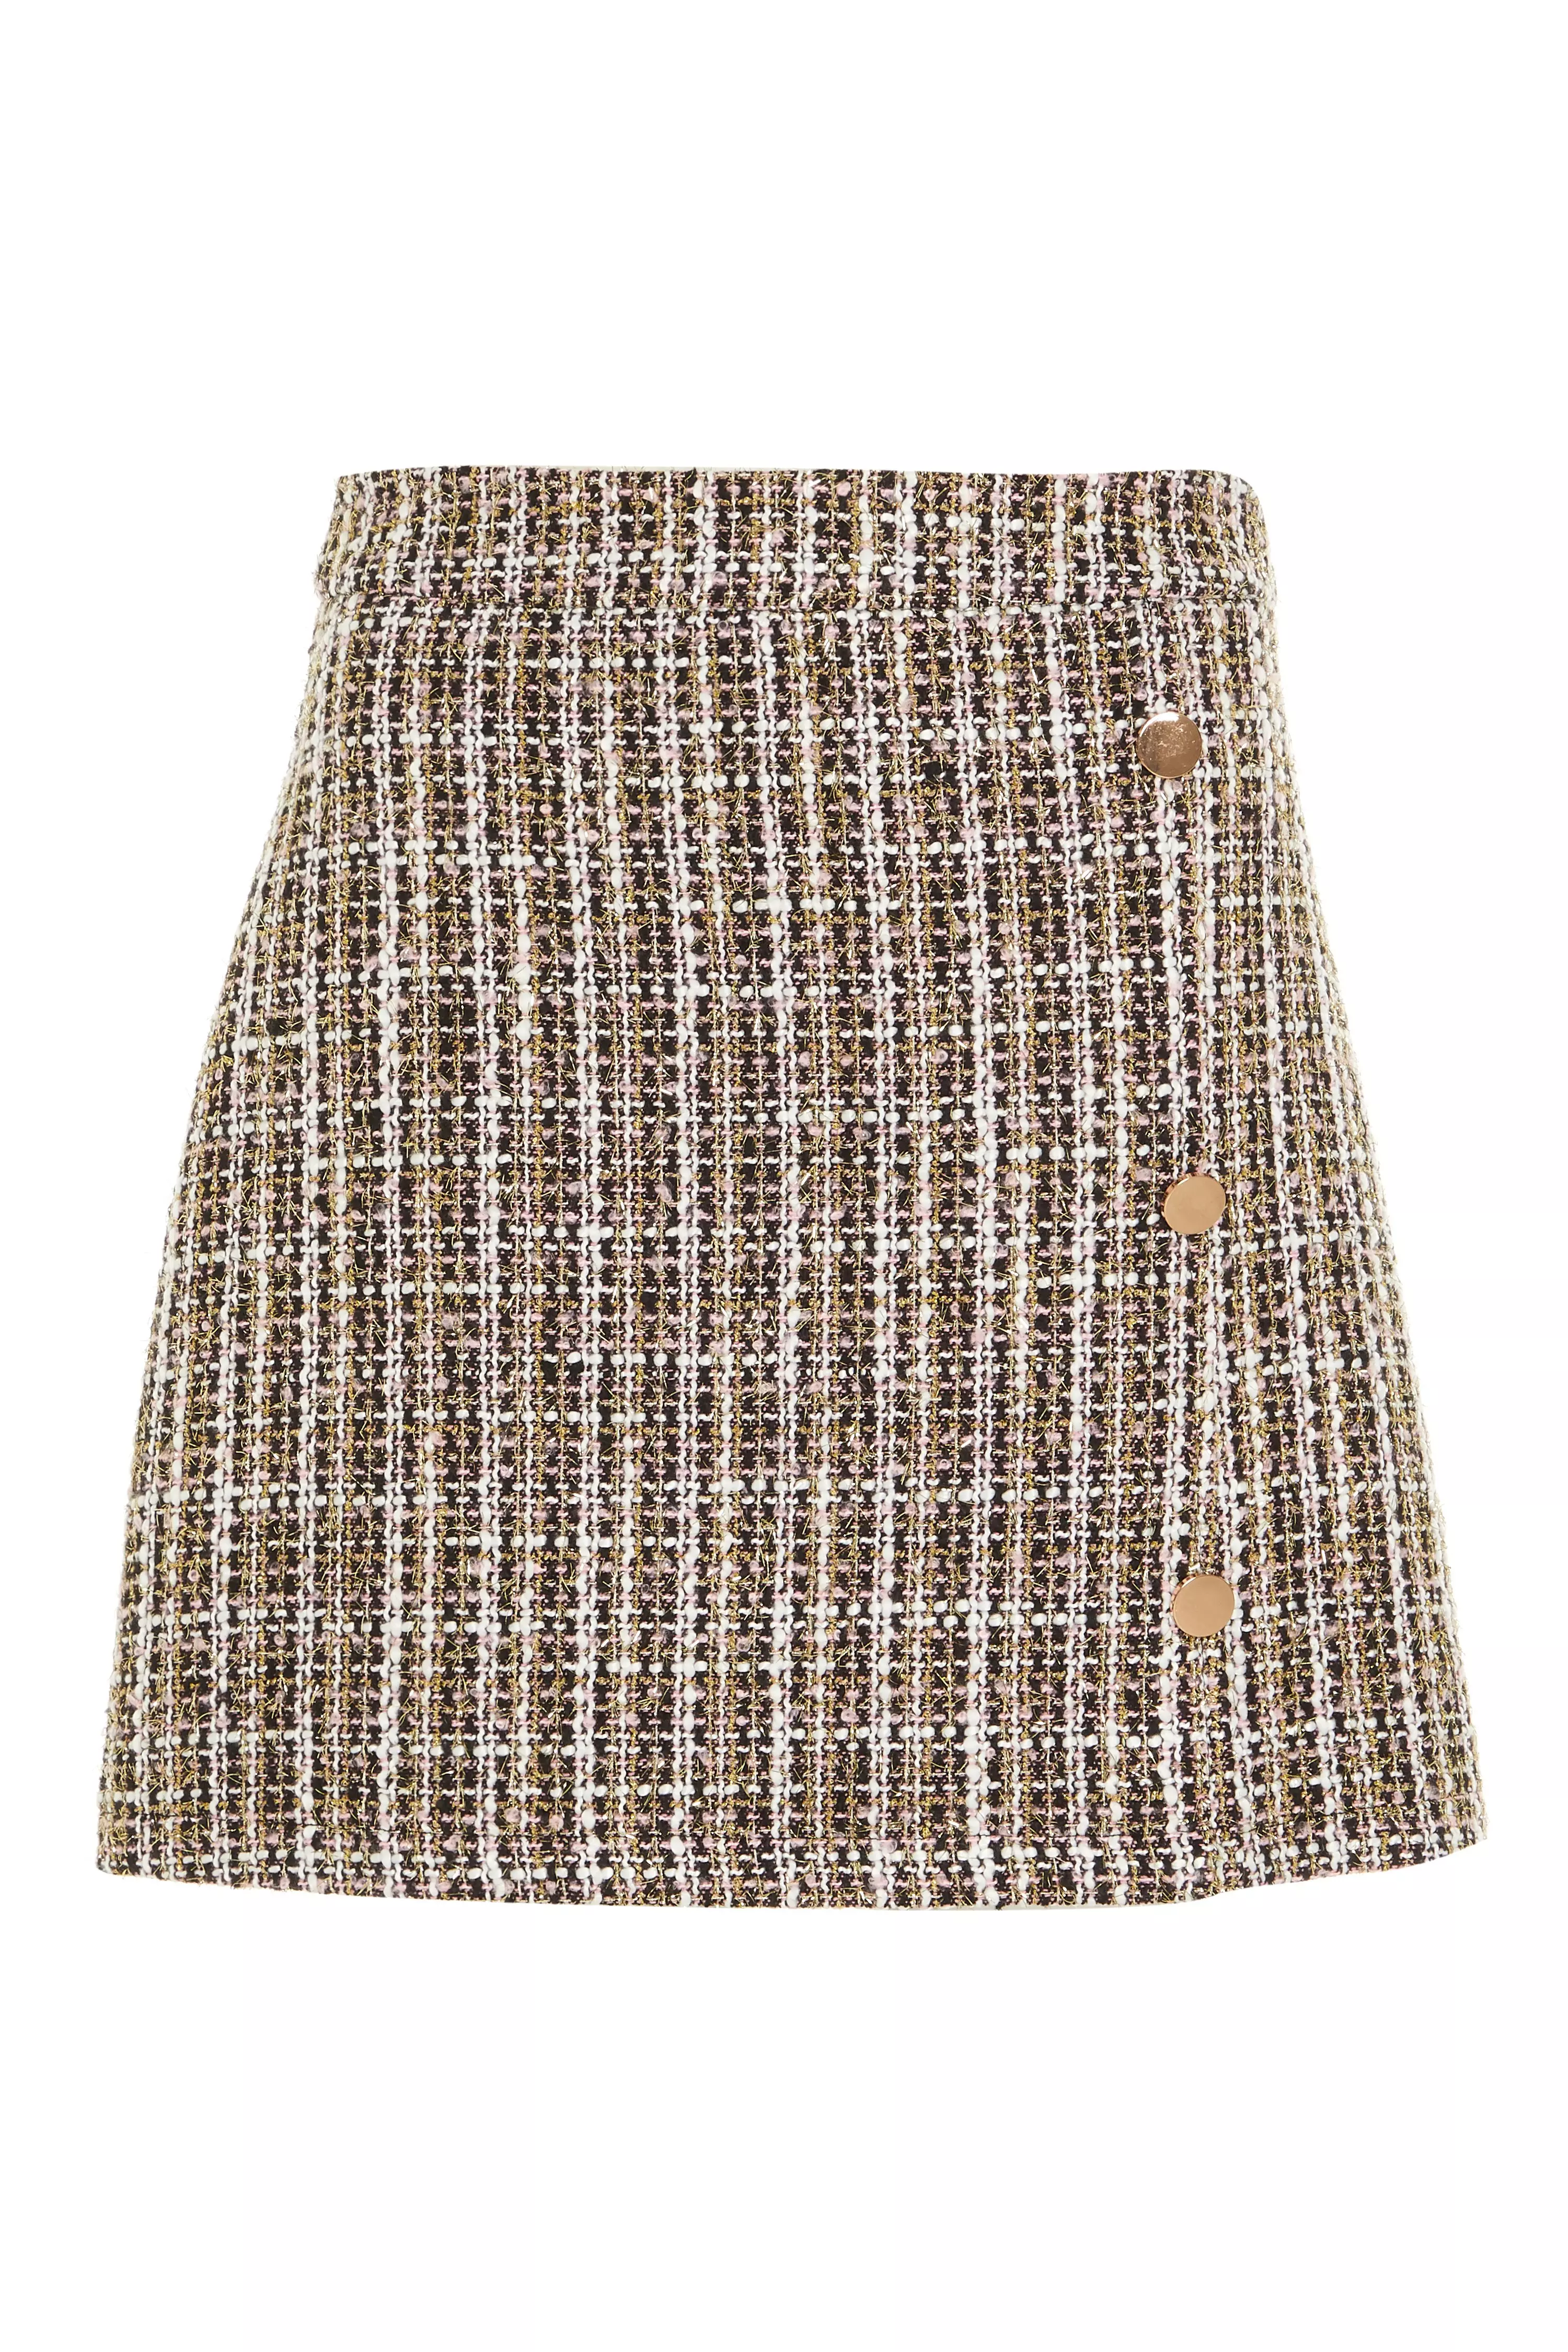 Multicoloured Check High Waist Tailored Skirt - QUIZ Clothing